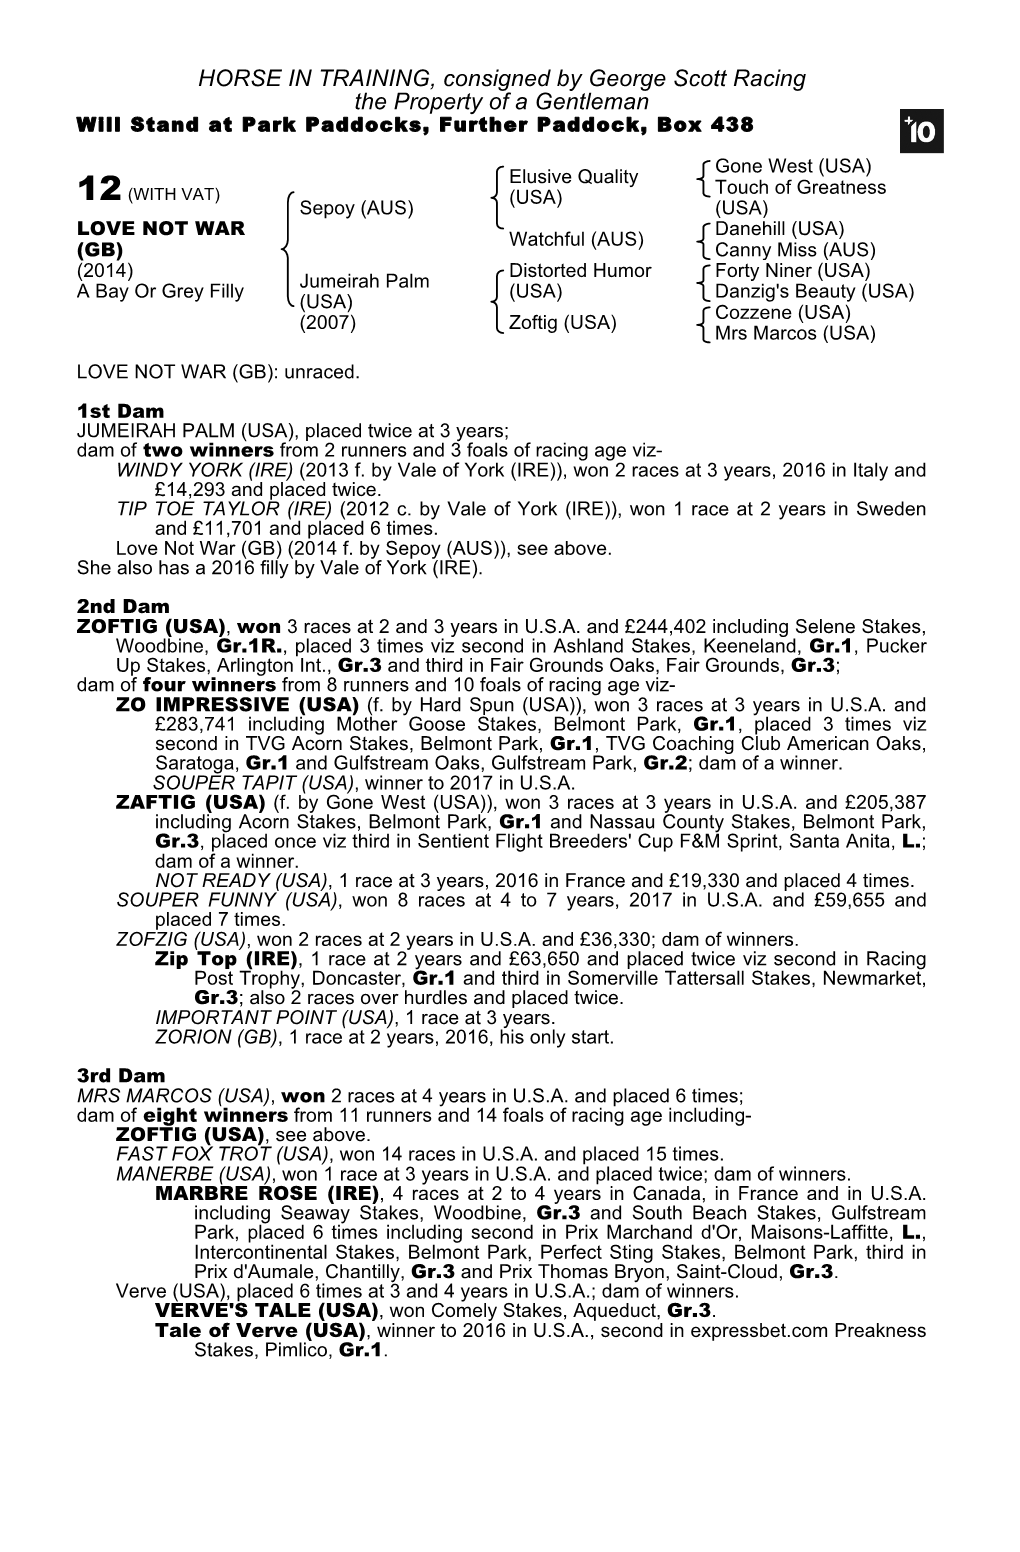 HORSE in TRAINING, Consigned by George Scott Racing the Property of a Gentleman Will Stand at Park Paddocks, Further Paddock, Box 438